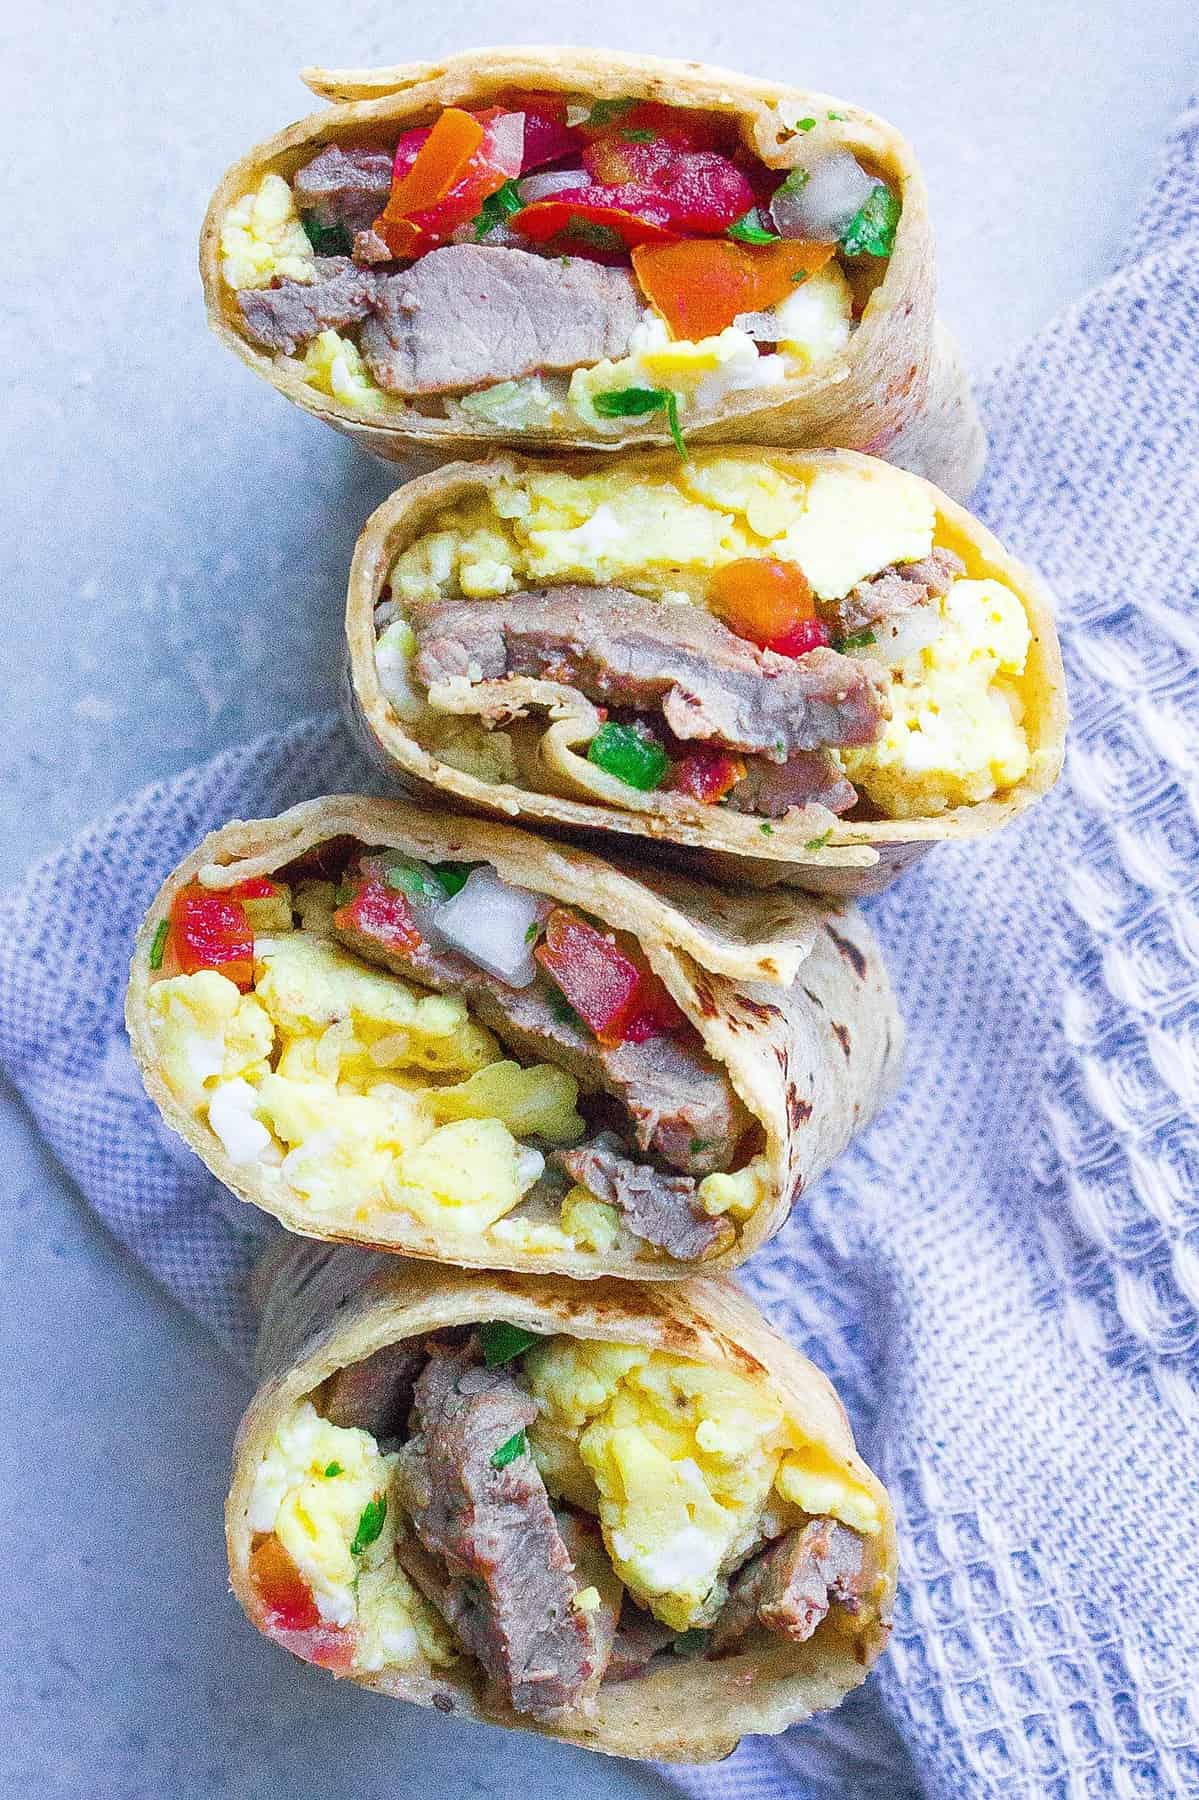  Rise and shine with a hearty Steak and Egg Burrito!